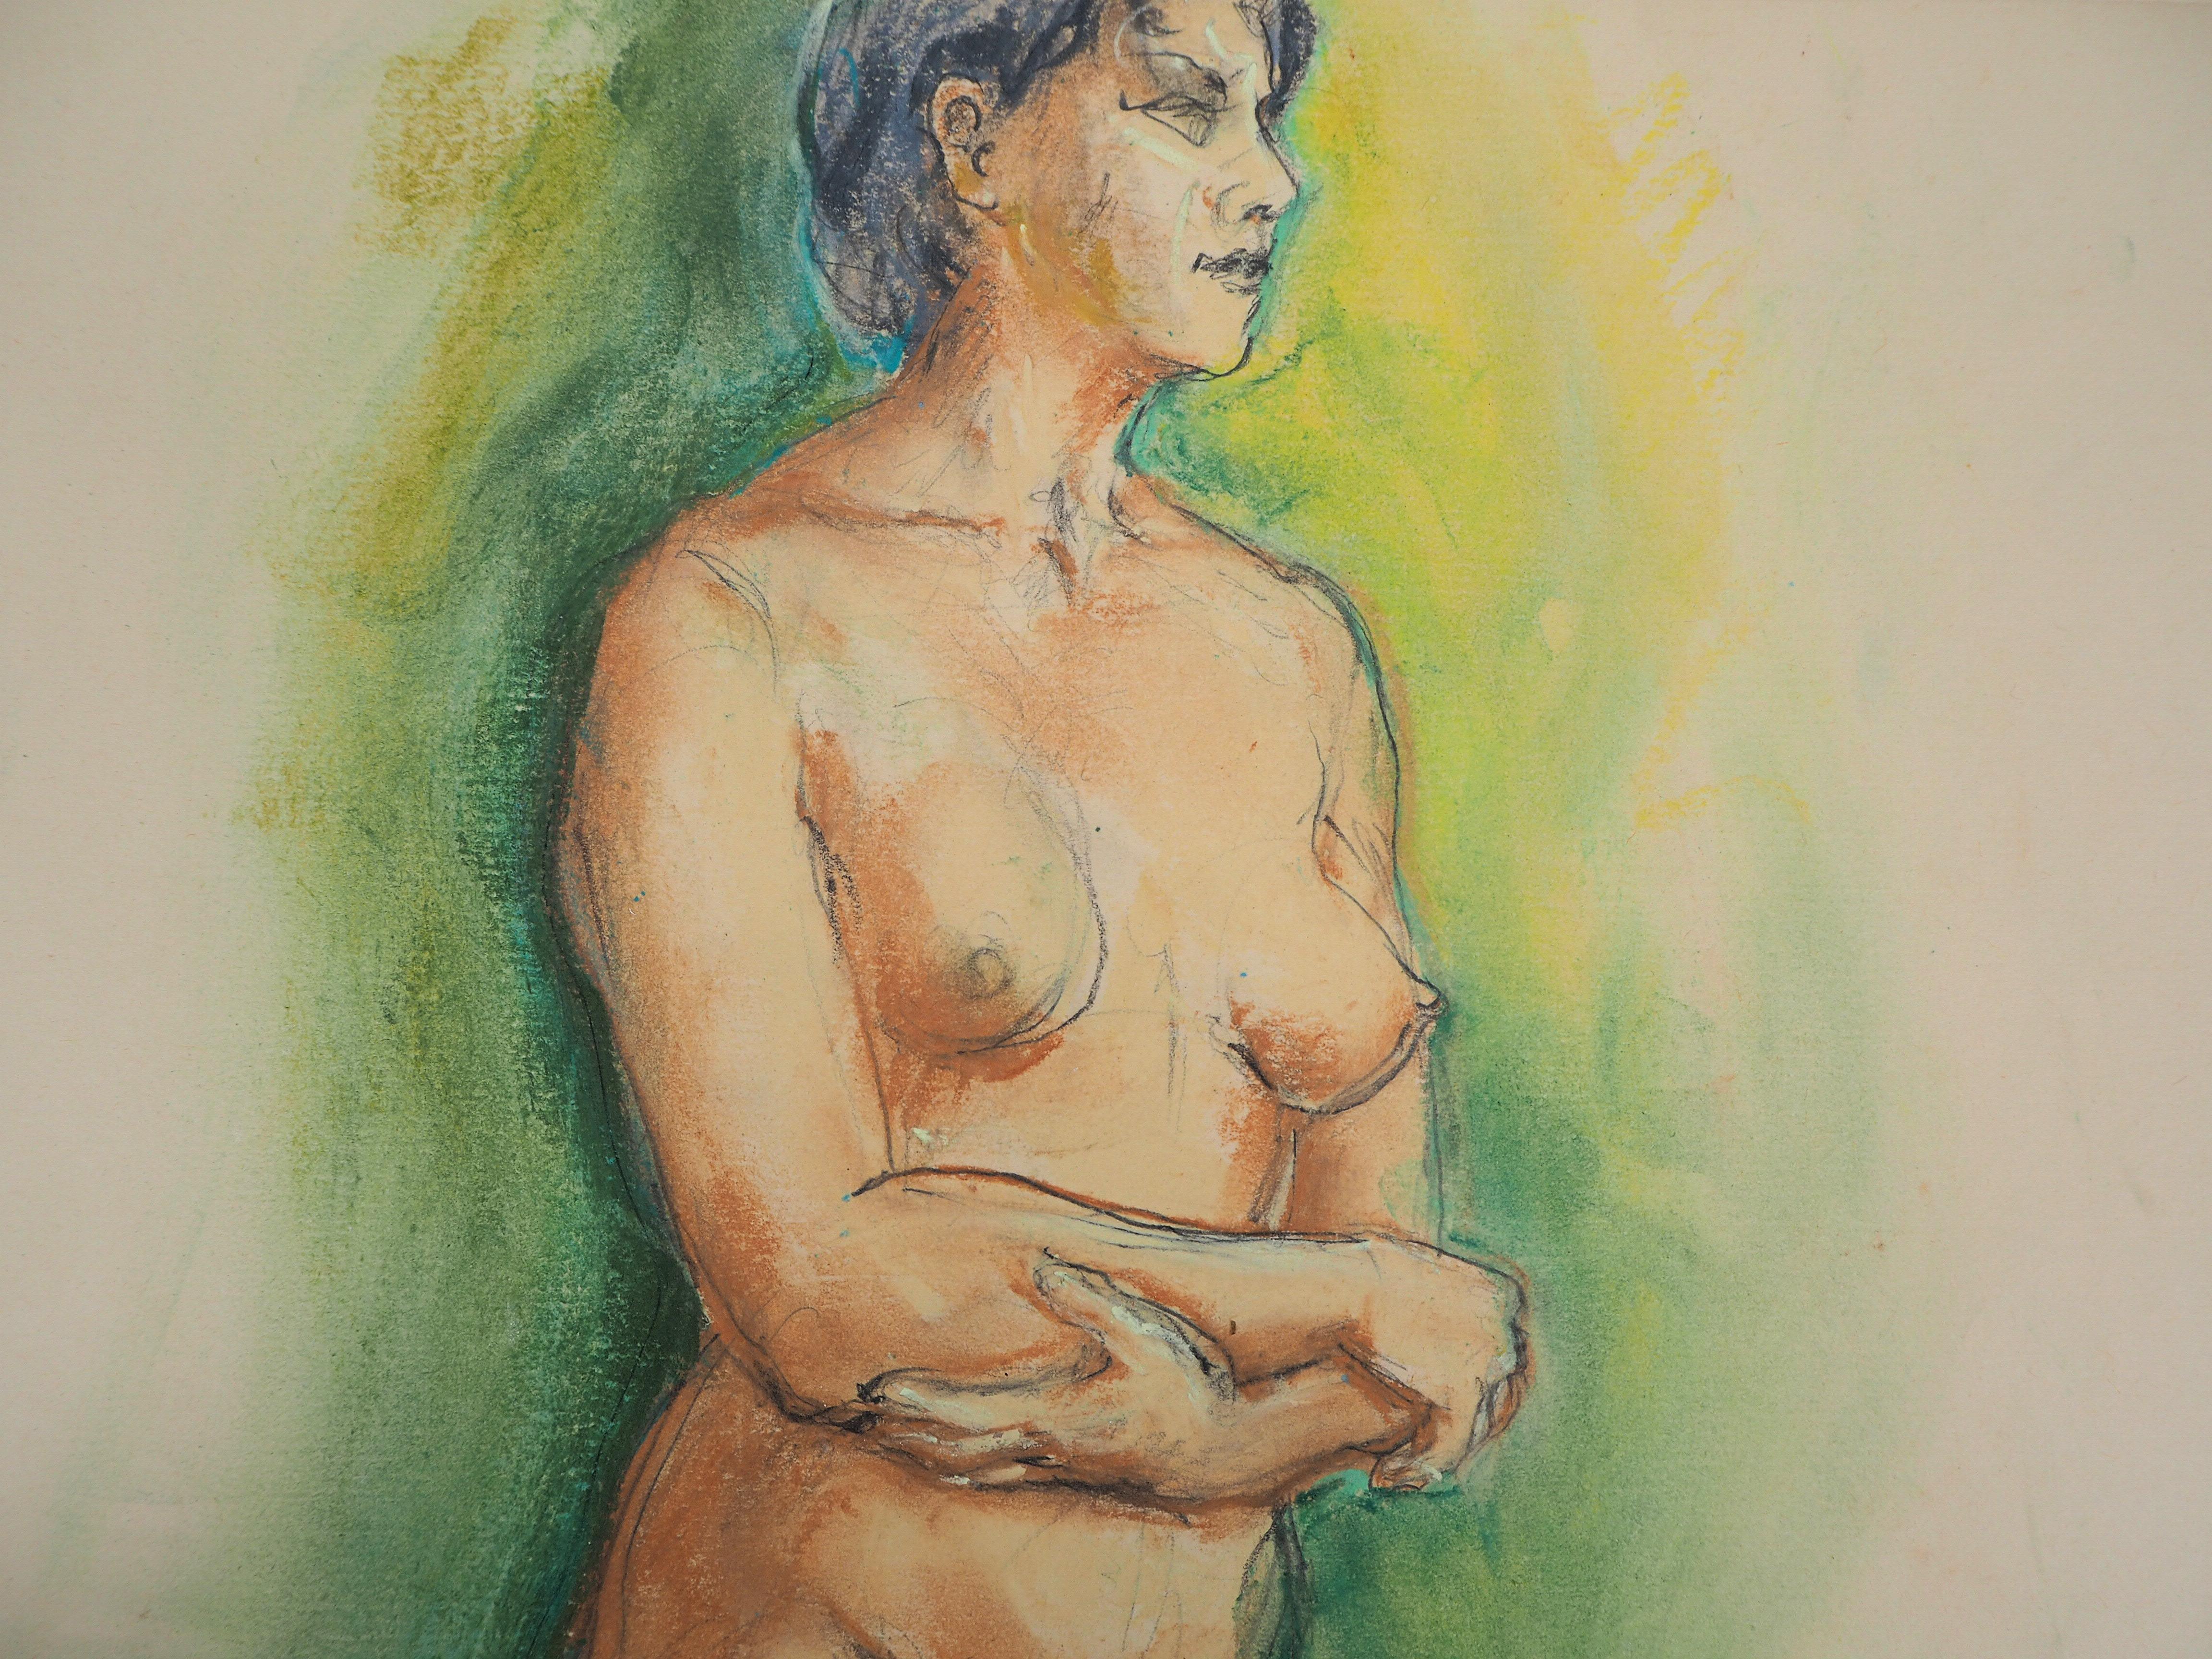 Gaston COPPENS (1909 - 2002)
Dreaming Nude

Original pastel drawing
Hand signed (with the monogram)
Stamp of the artist on the back
On wove paper 40 x 33 cm (c 15.7 x 12.9 inch)

Excellent condition

Gaston Coppens studied sculpture in the